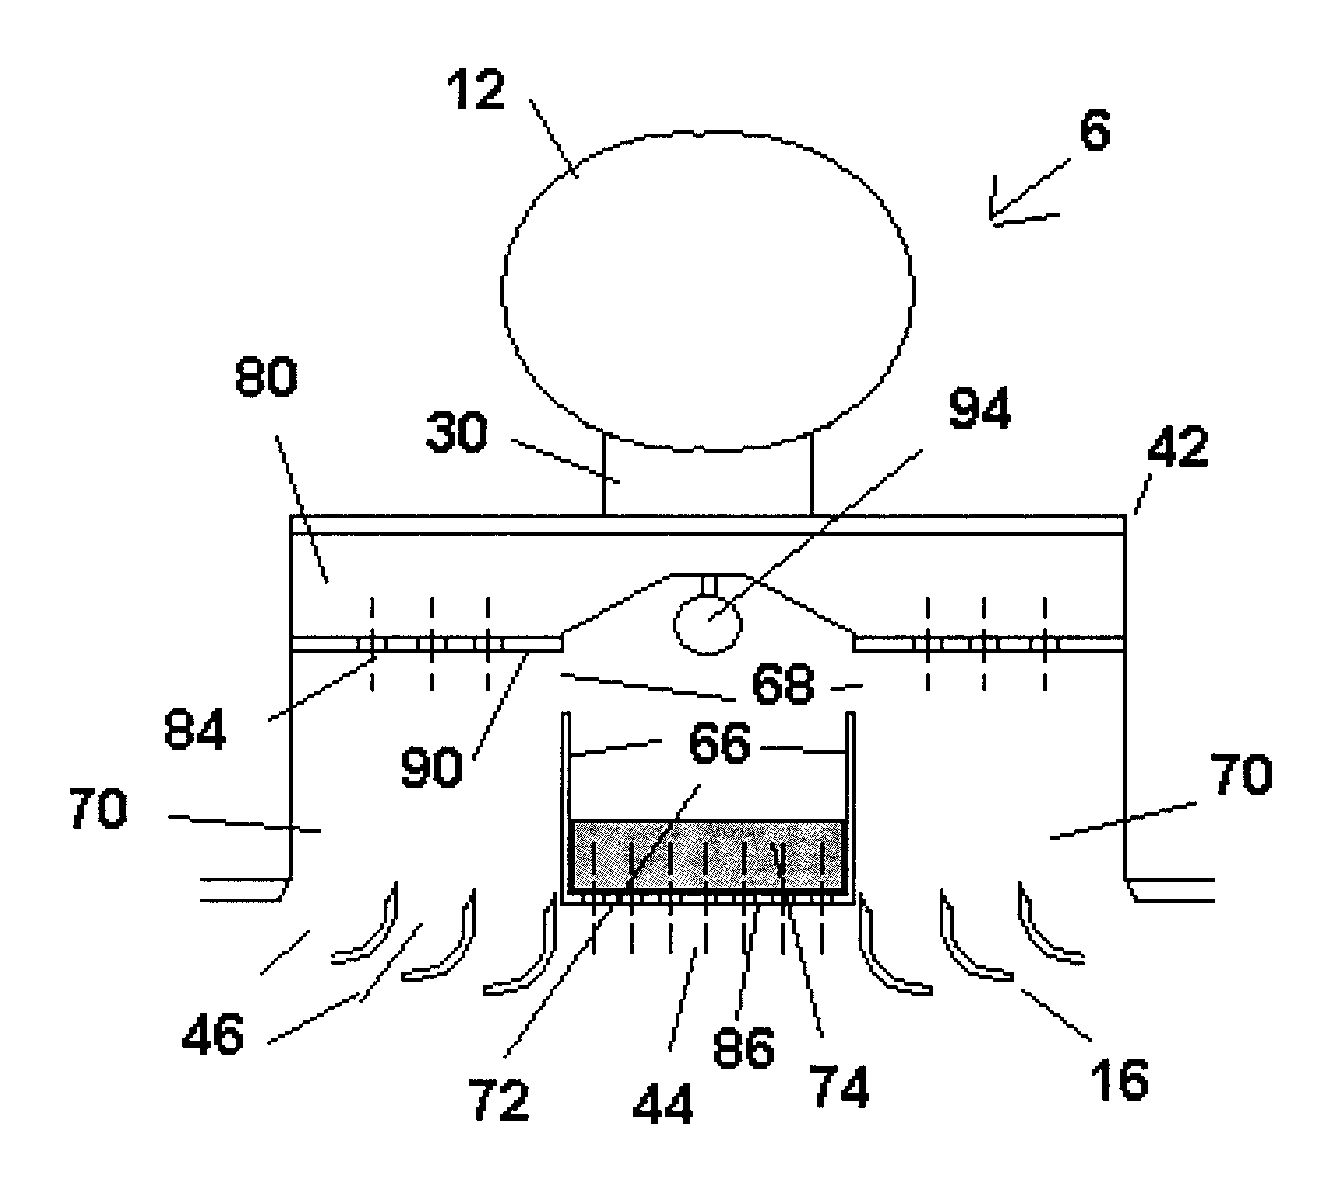 Entrainment air flow control and filtration devices